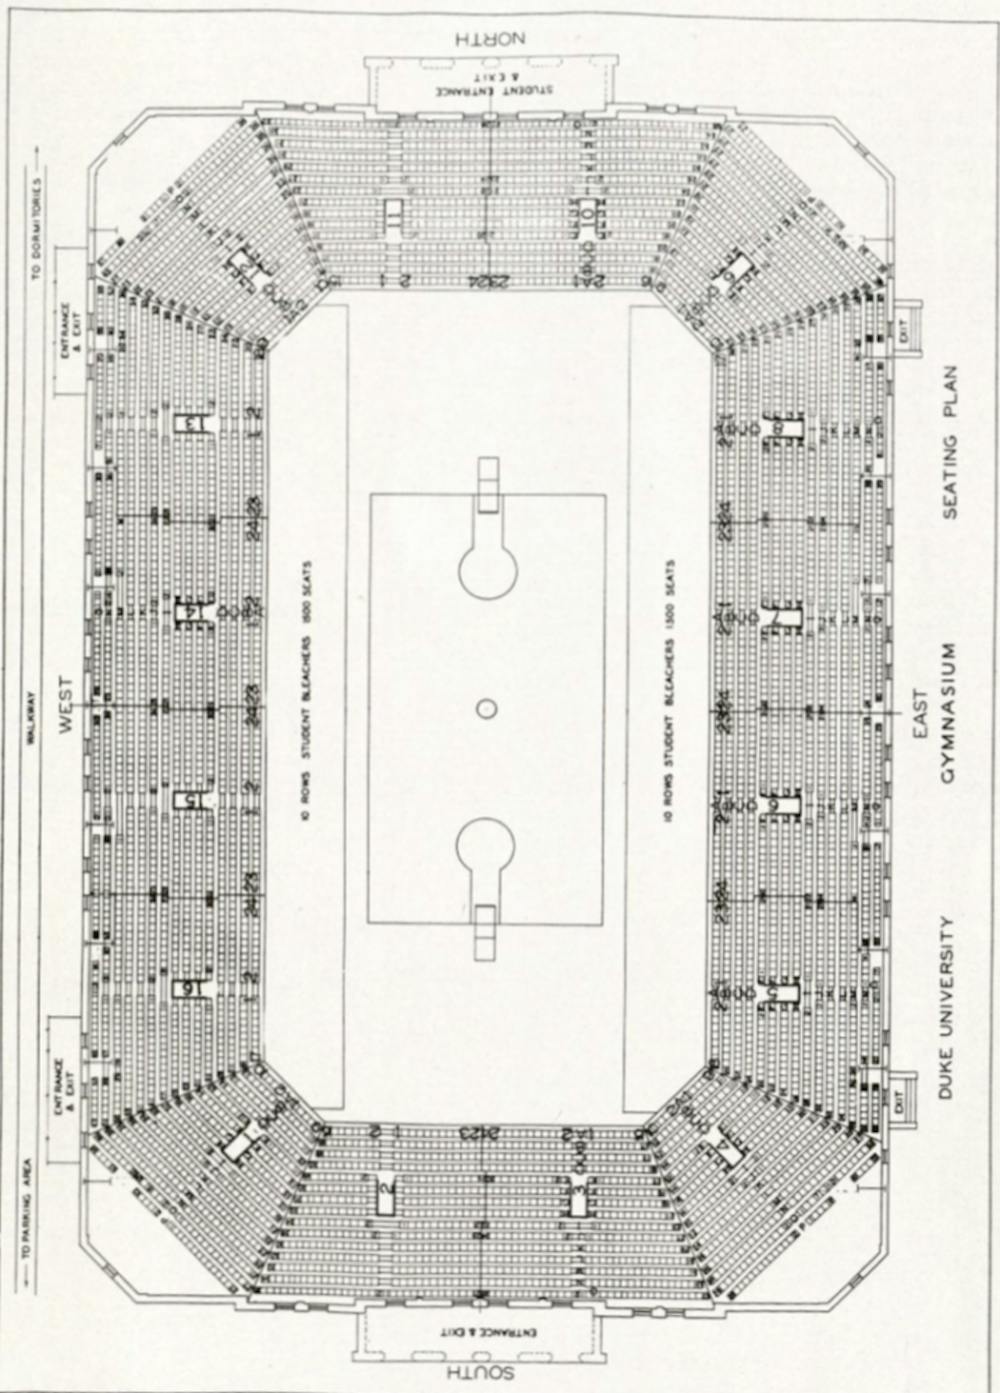 The original layout and seating chart for what would later become known as Cameron Indoor Stadium